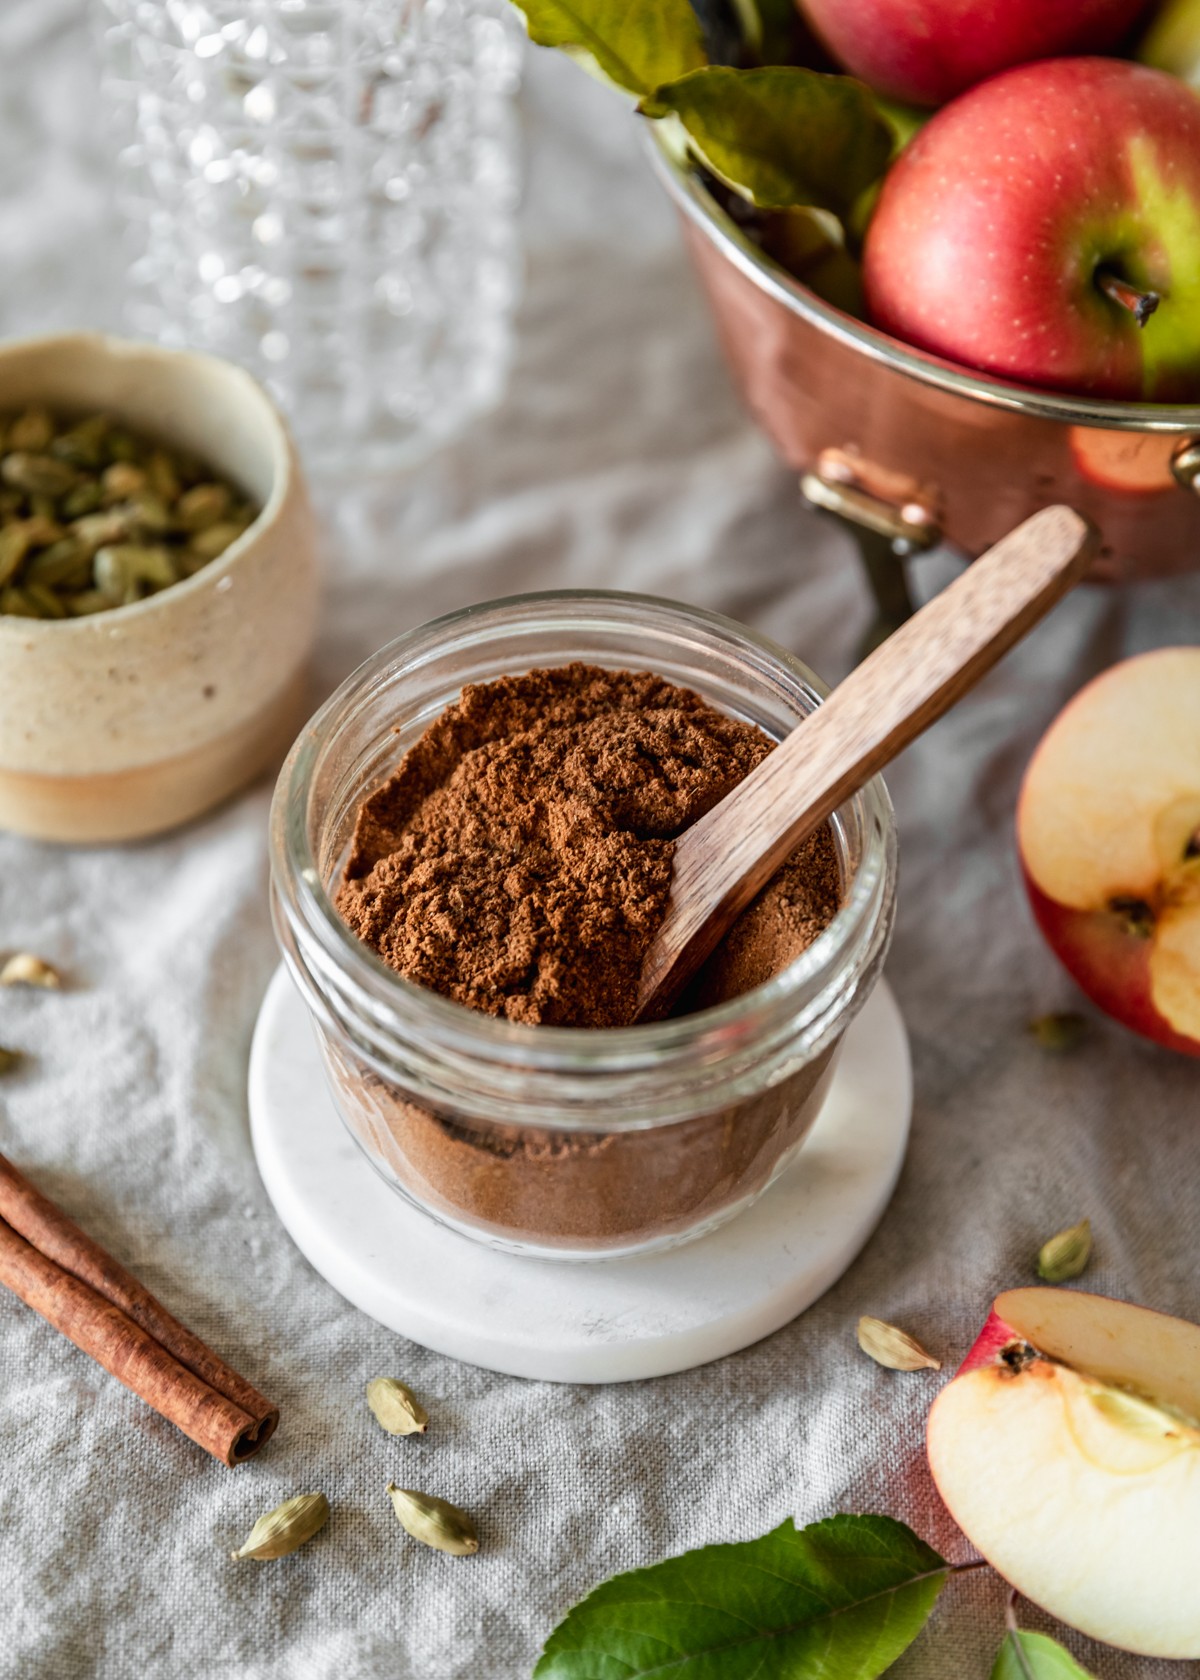 A side image of a jar of homemade apple pie spice on a beige linen next to a copper colander, sliced apple, cream bowl of cardamom pods, and a cinnamon stick.